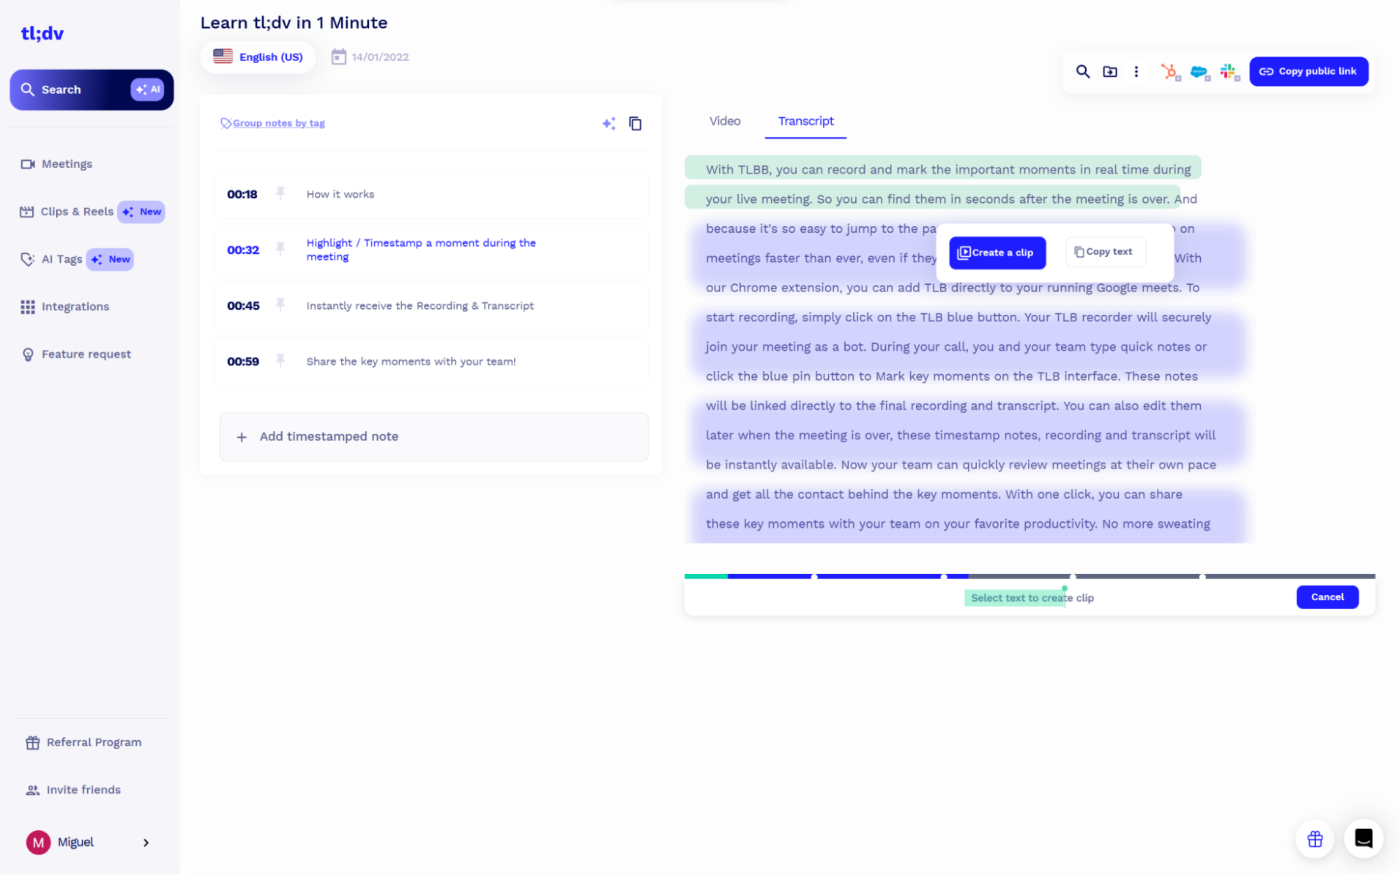 tl;dv, our pick for the best AI meeting assistant for AI-powered search